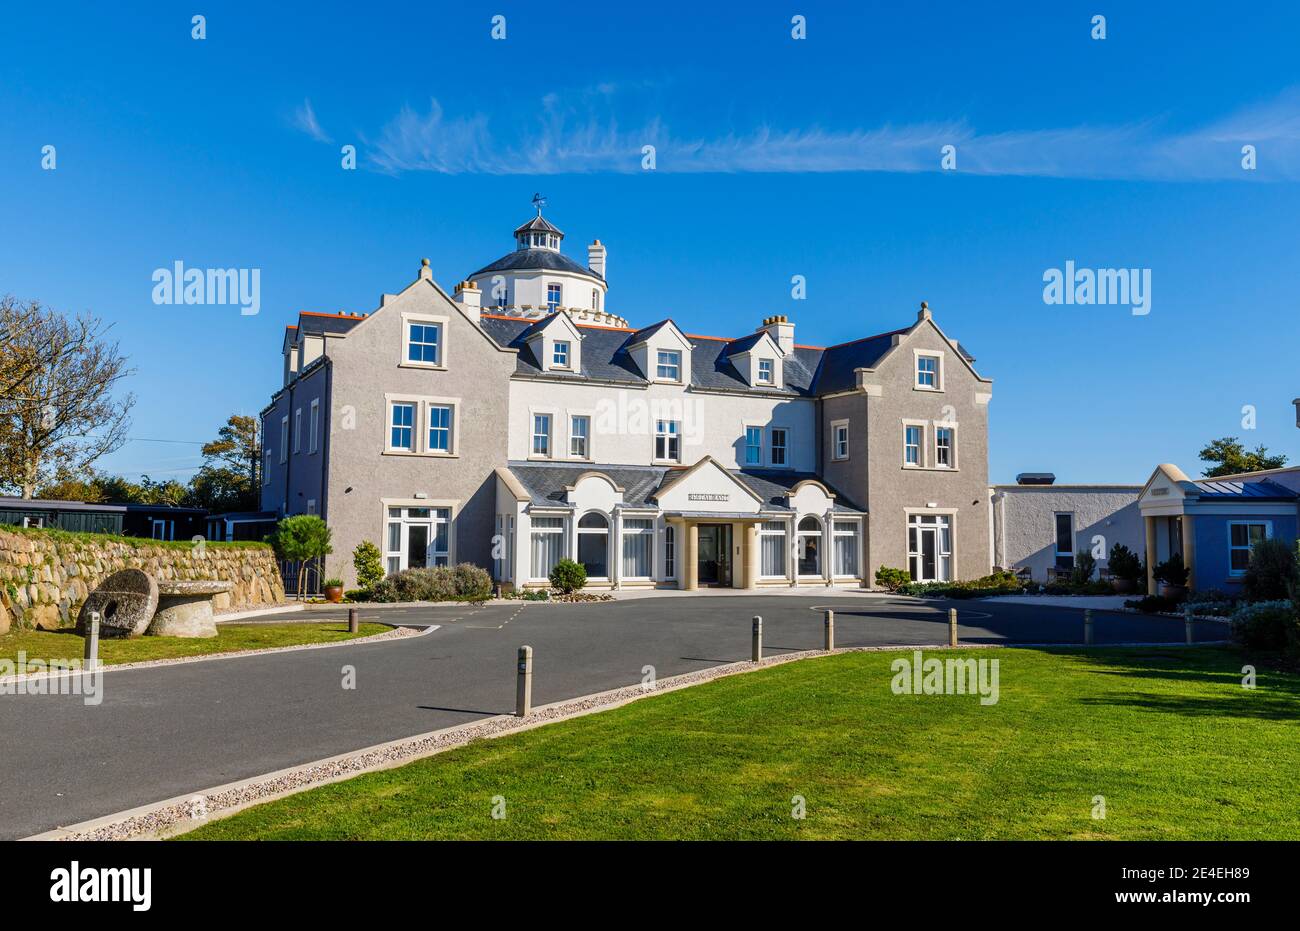 The entrance to and exterior of Twr y Felin Hotel and restaurant in St Davids, a small cathedral city in Pembrokeshire, southwest Wales on a sunny day Stock Photo